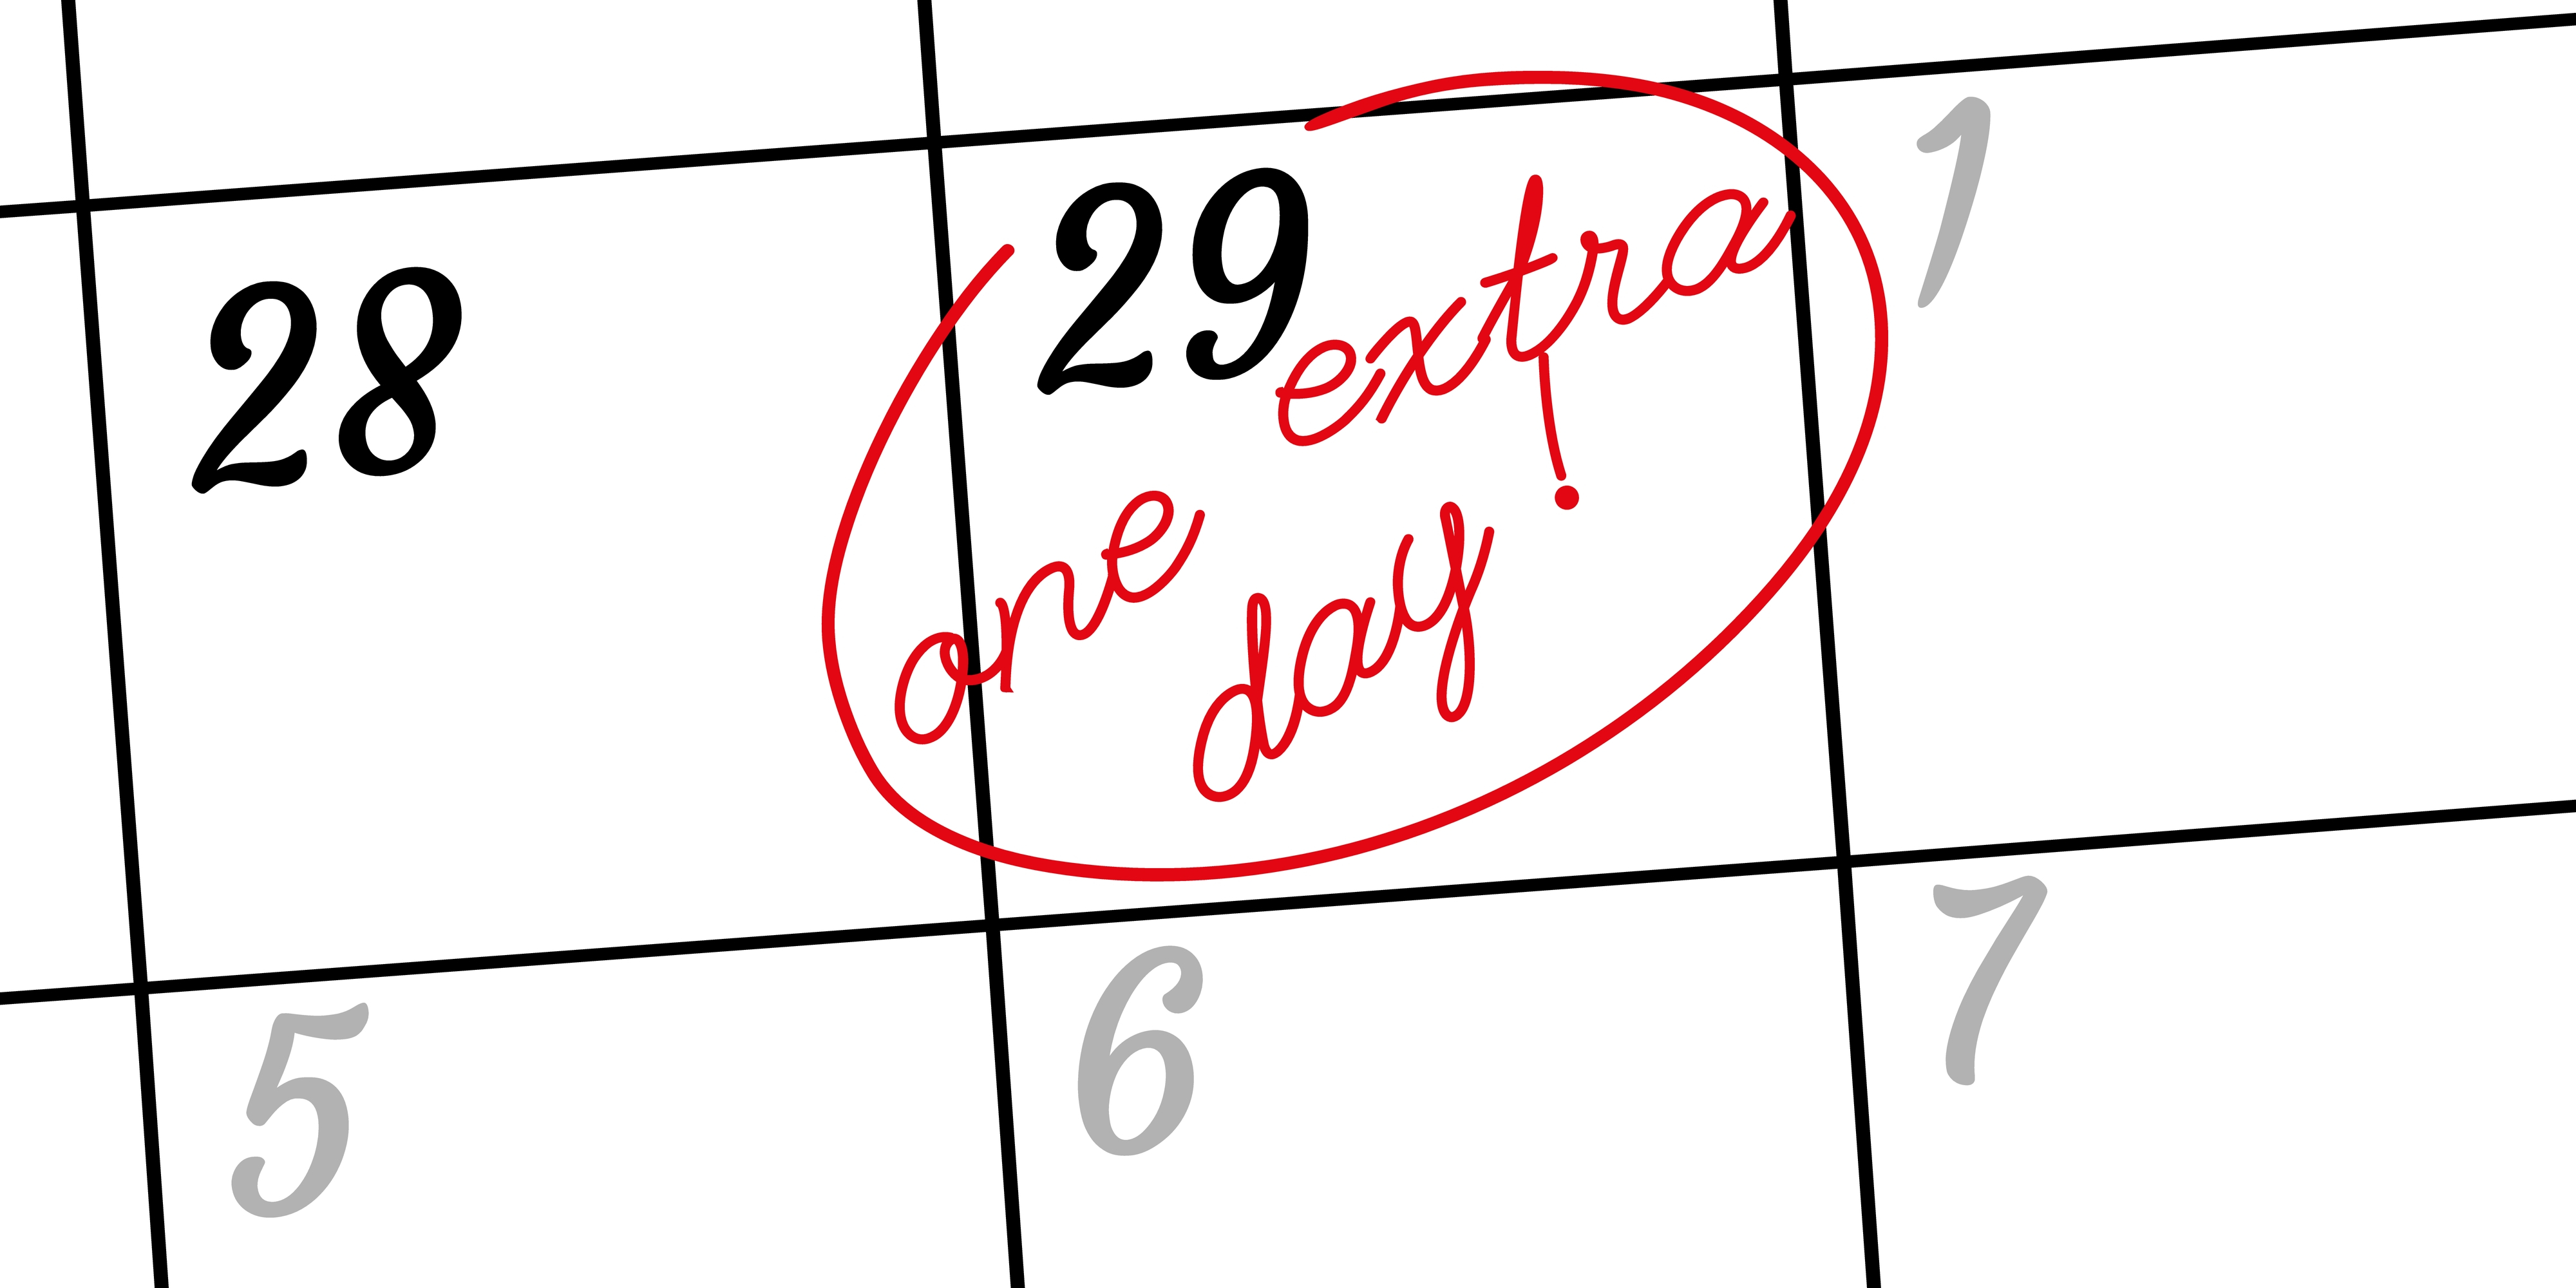 On a calendar, the date 29 is circled, and handwriting says: one extra day!